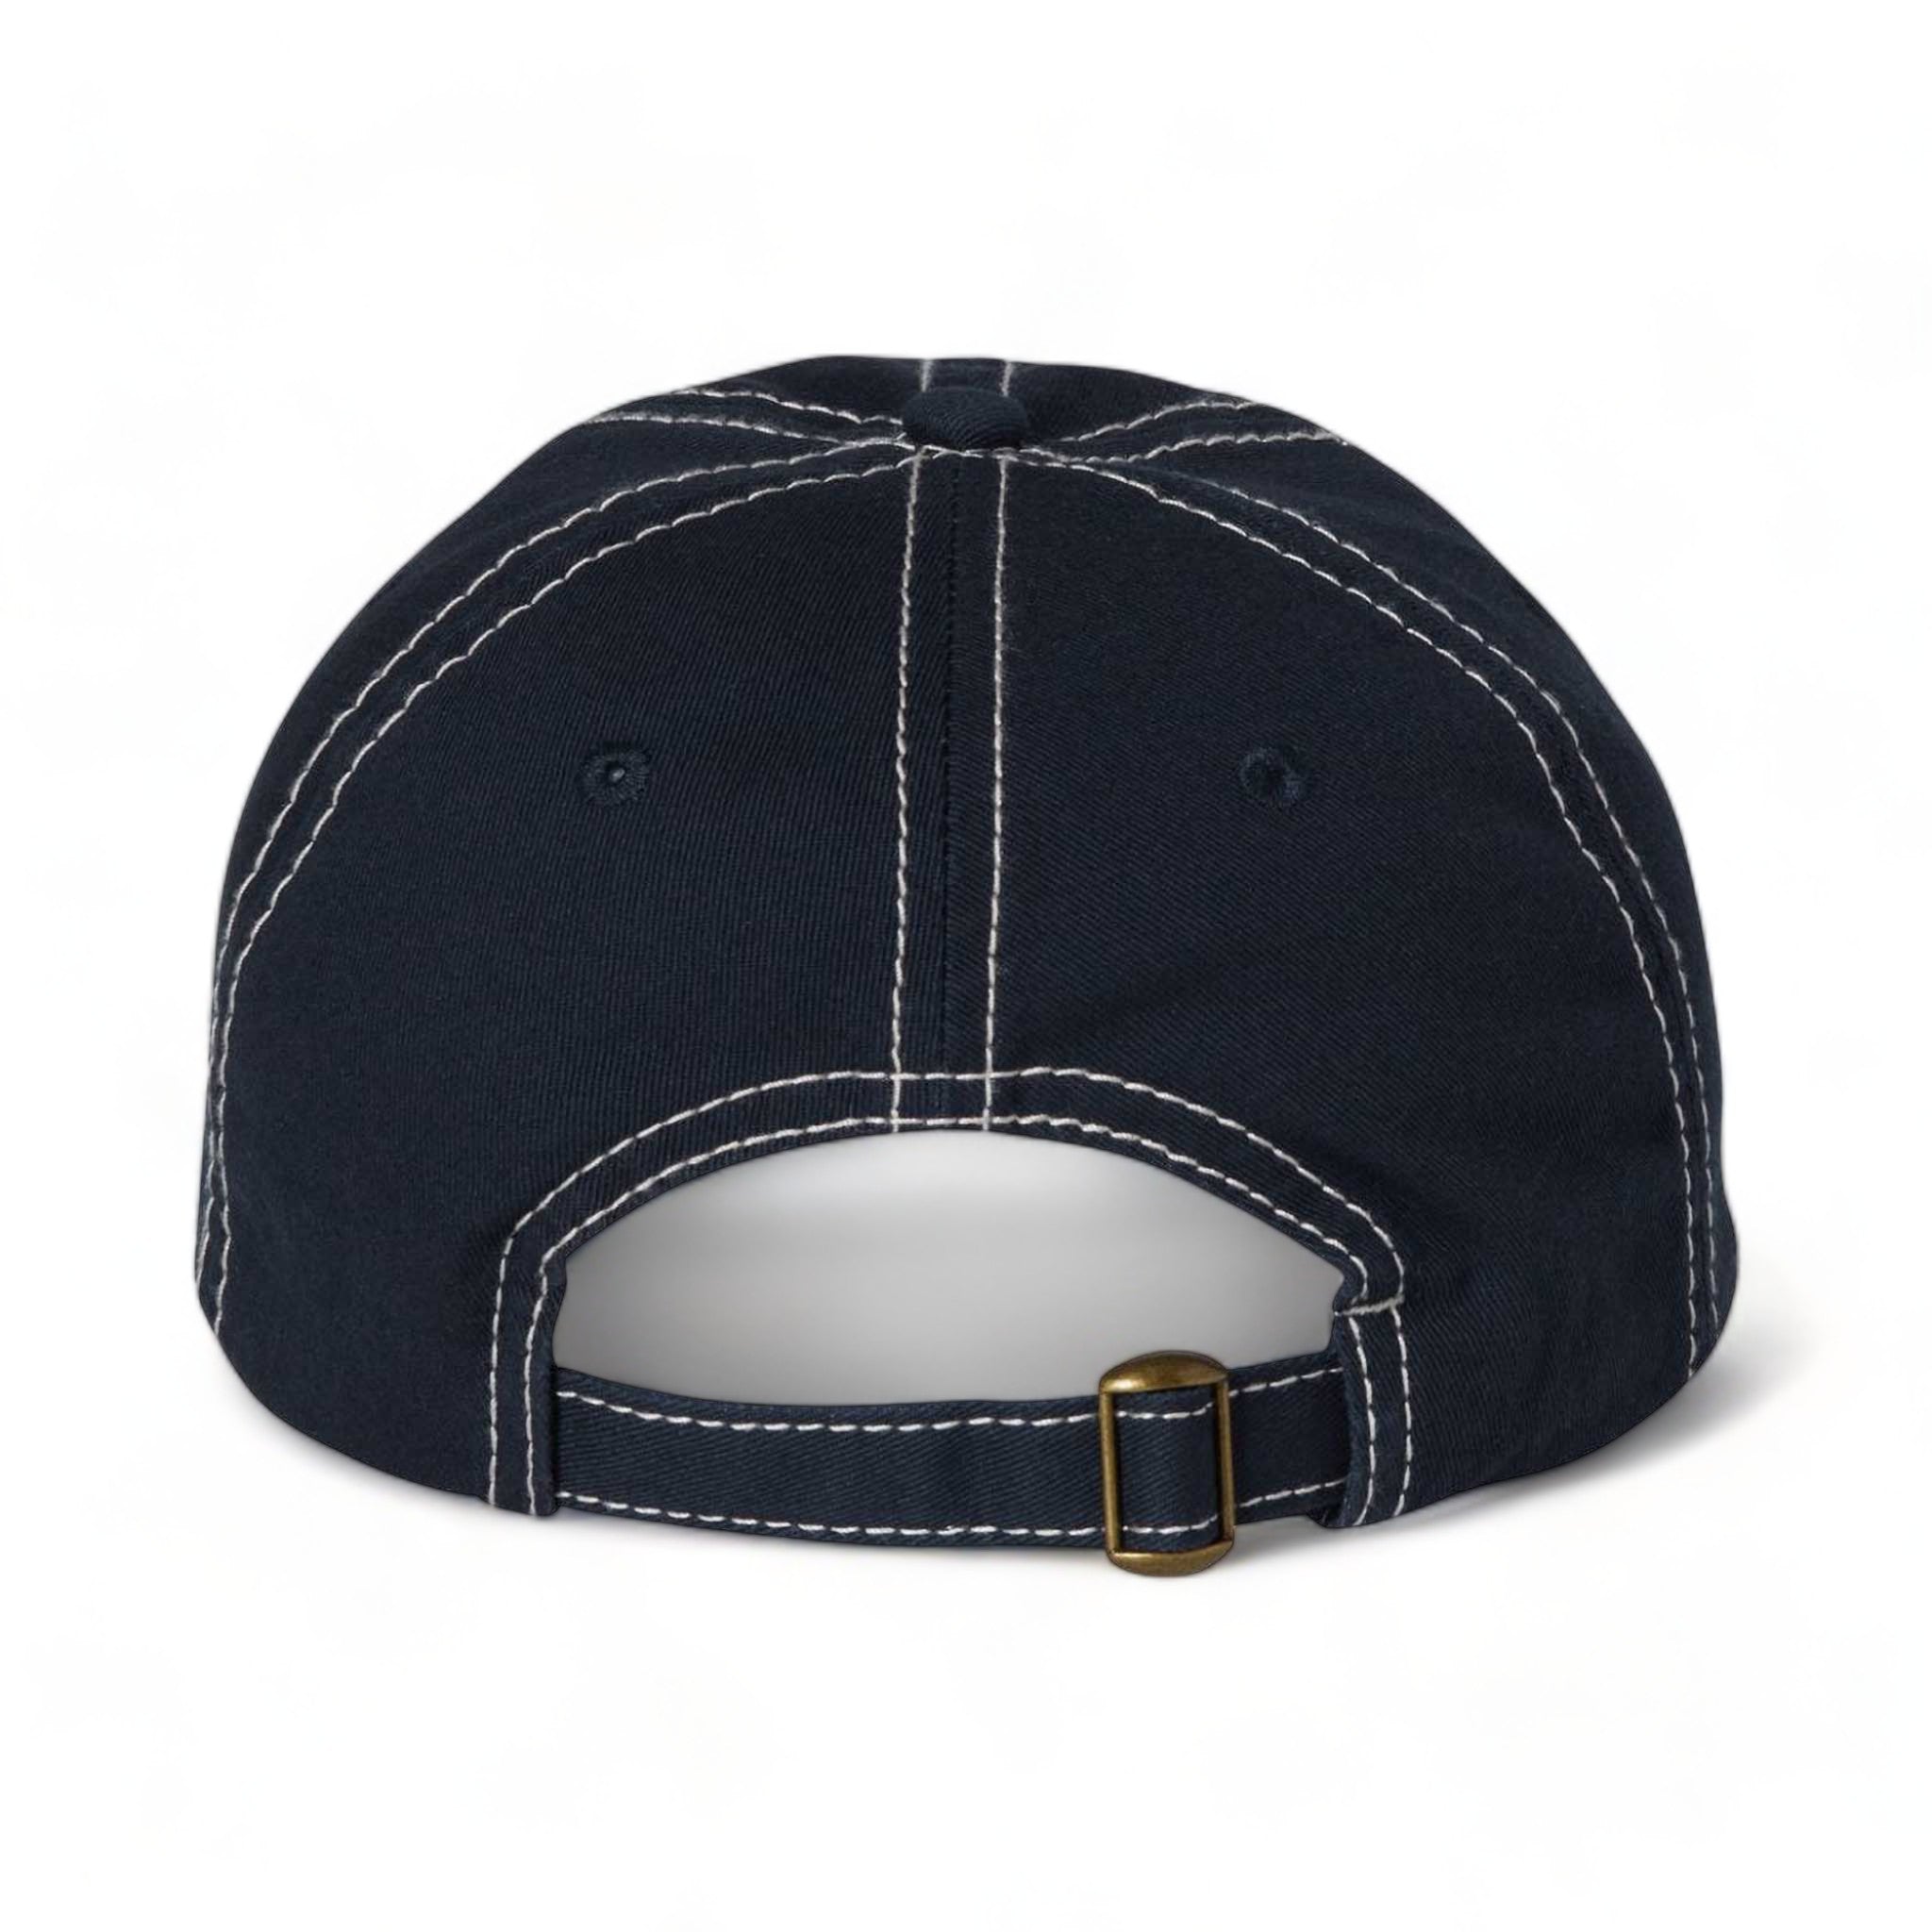 Back view of Valucap VC300A custom hat in navy and stone stitch